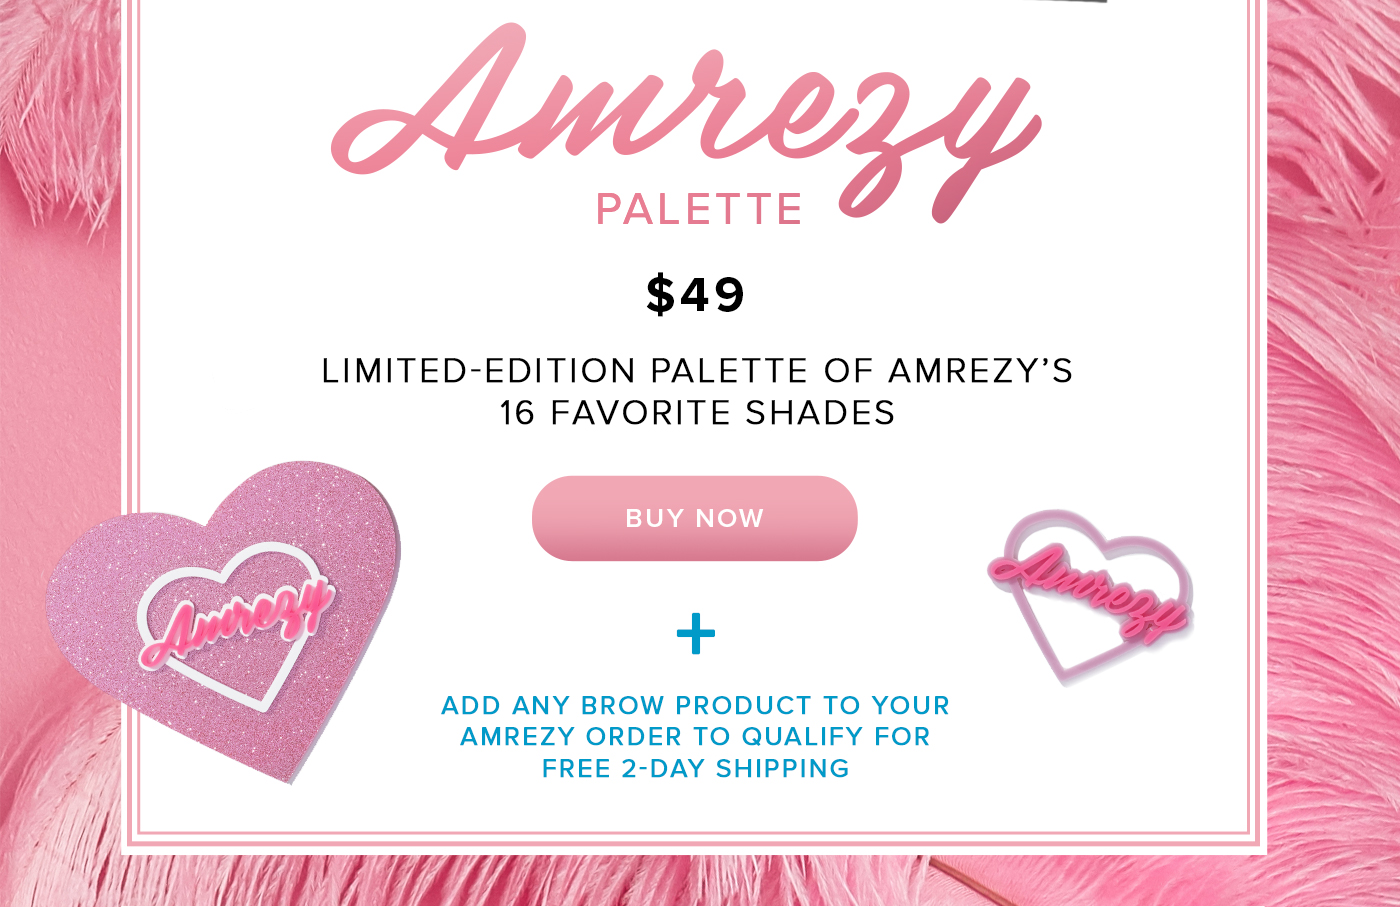 Amrezy PALETTE. $49 LIMITED-EDITION PALETTE OF AMREZY'S 16 FAVORITE SHADES BUY NOW PLUS ADD ANY BROW PRODUCT TO YOUR AMREZY ORDER TO QUALIFY FOR FREE 2-DAY SHIPPING